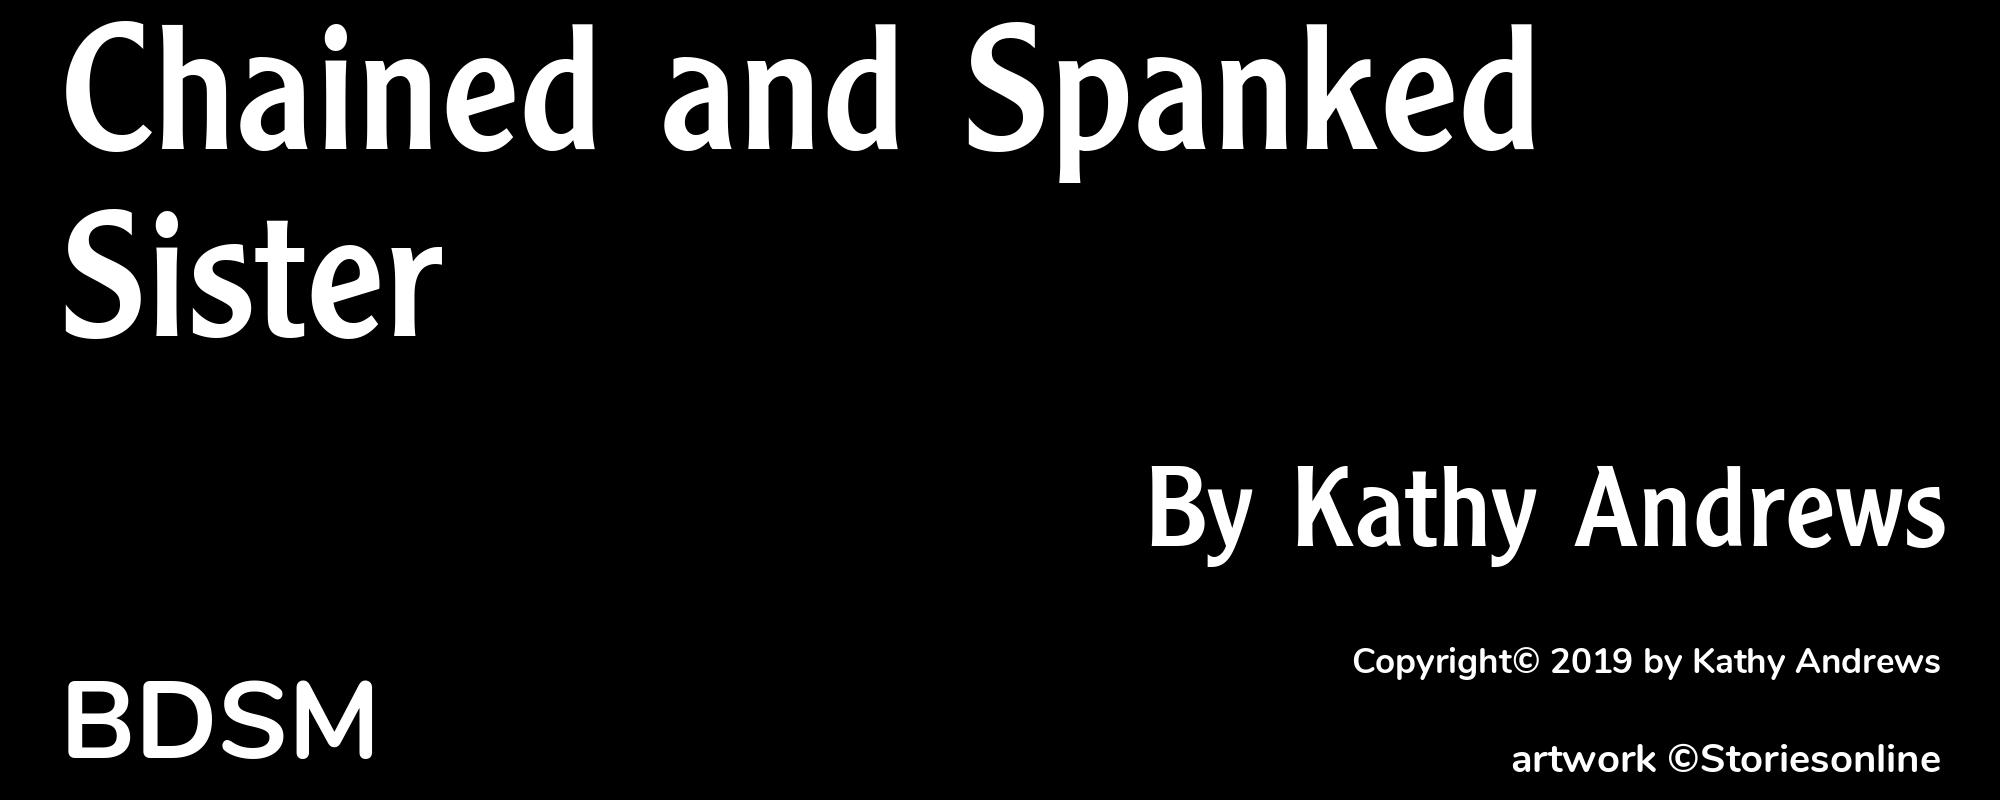 Chained and Spanked Sister - Cover